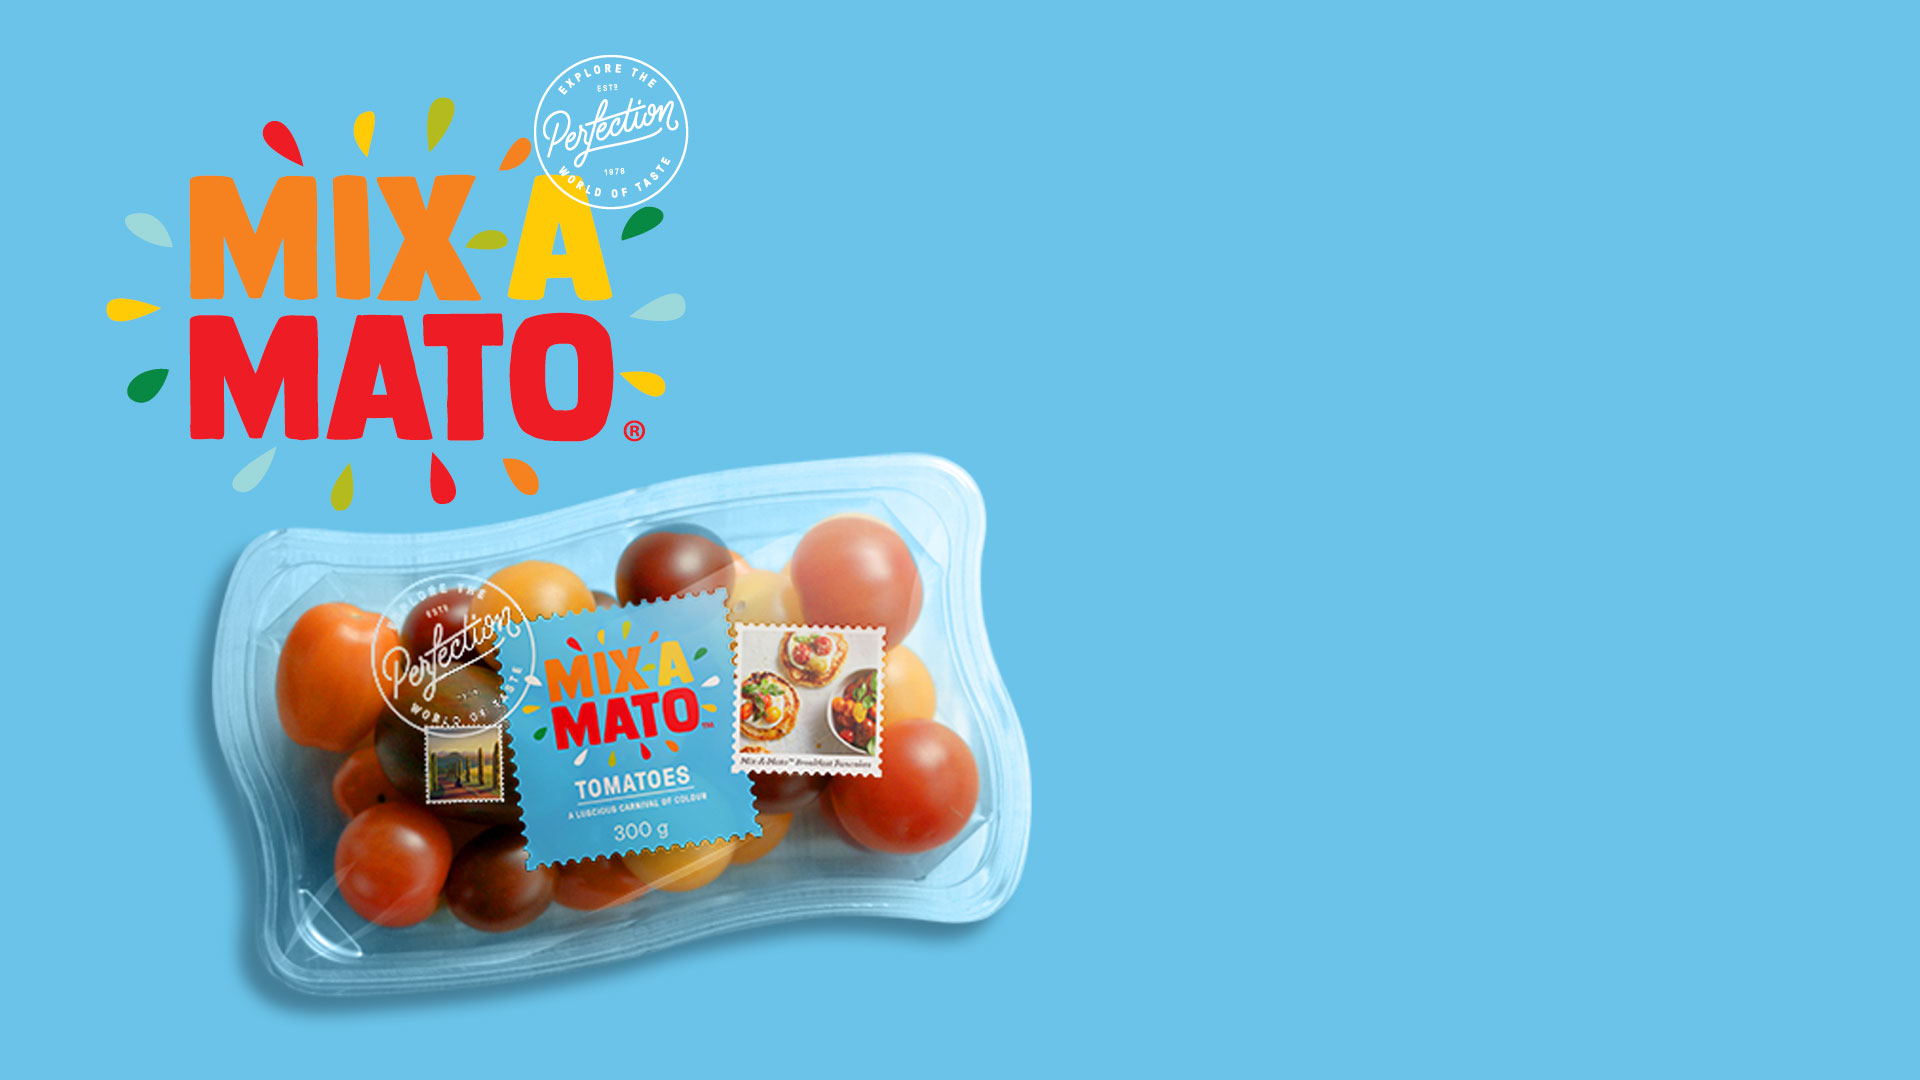 Make Any Meal Bright With Mix-A-Mato